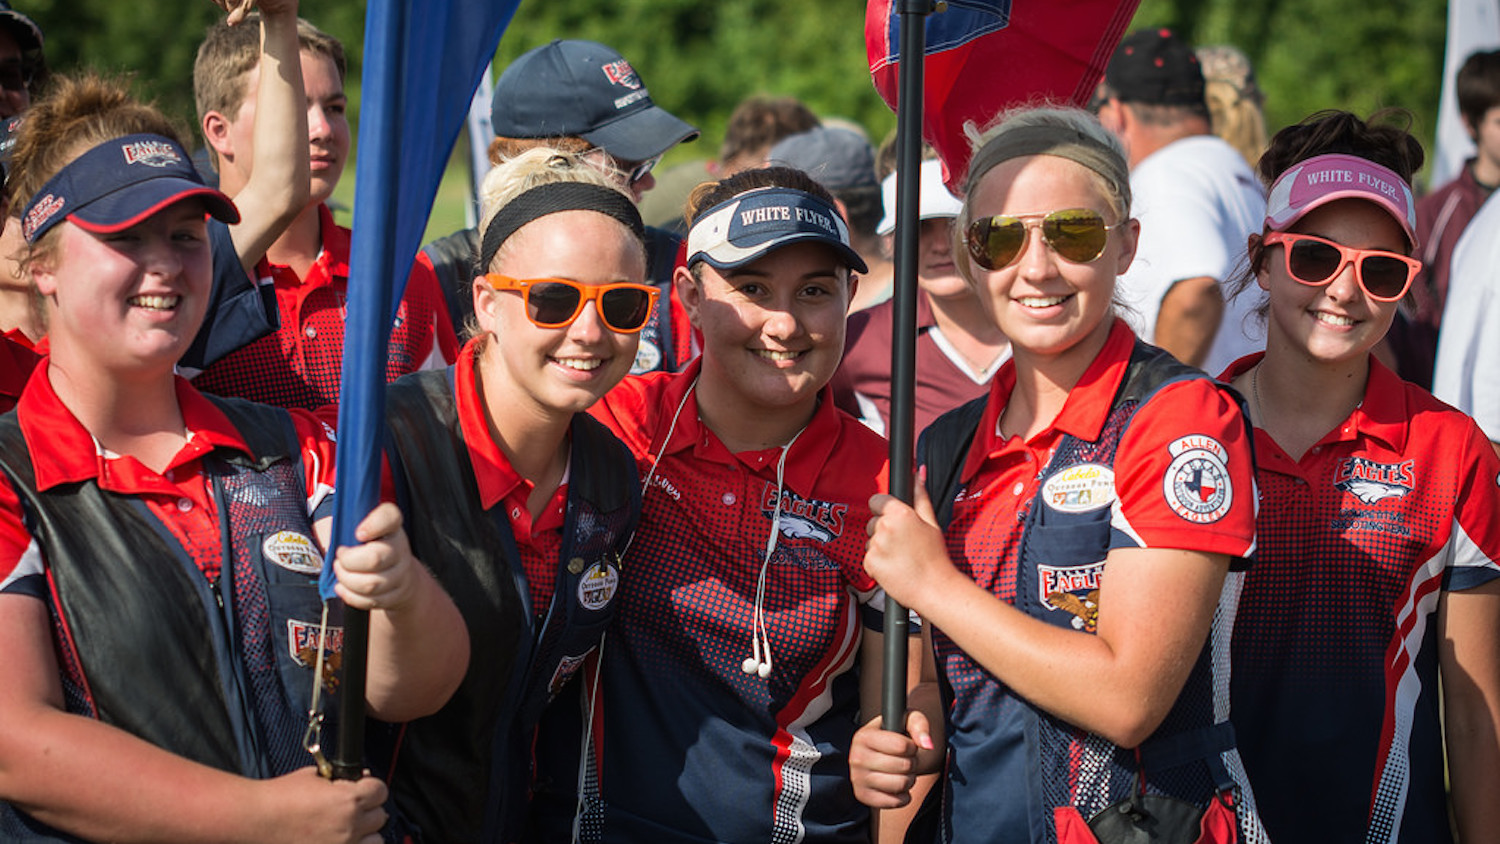 Apply Now for 2018 SSSF/NRA All Scholastic Team